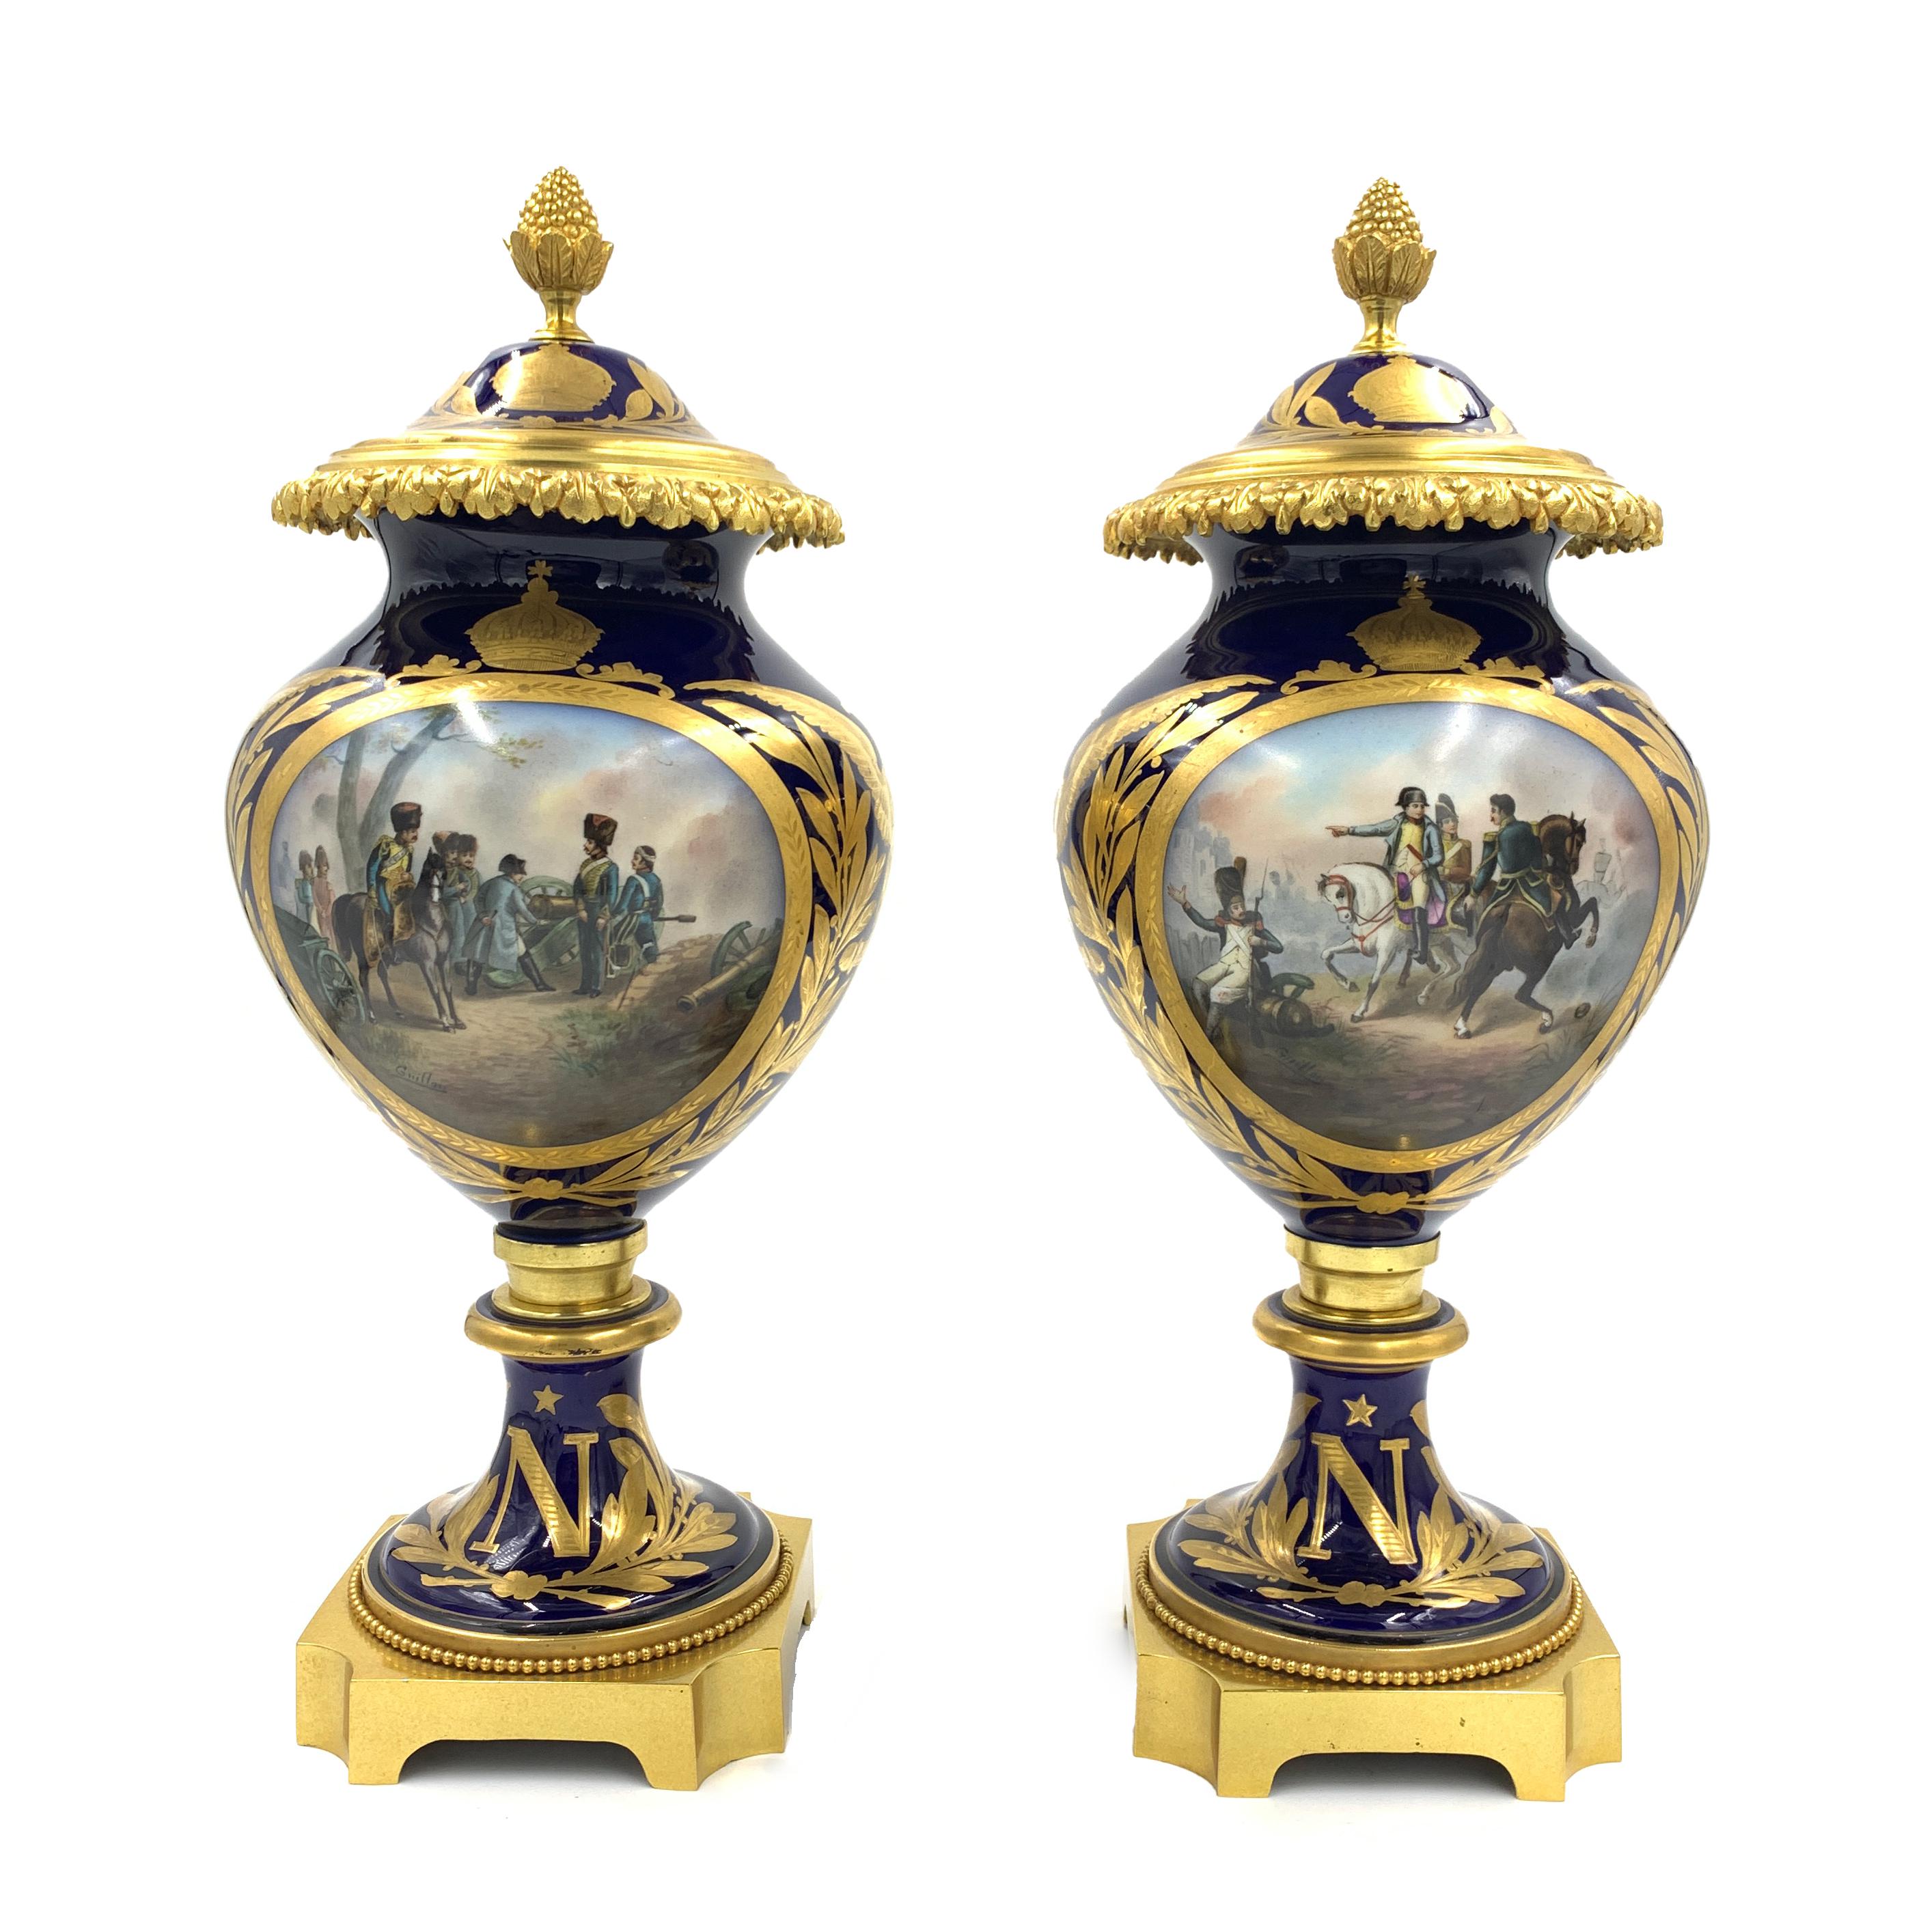 A pair of Sevres style gilt-metal mounted vases and covers decorated in the Imperial manner, circa 1900, each vase stands on a square ormolu base, painted with battle scenes, reserved on a blue and gilt ground, the base with Imperial 'N' cypher. The